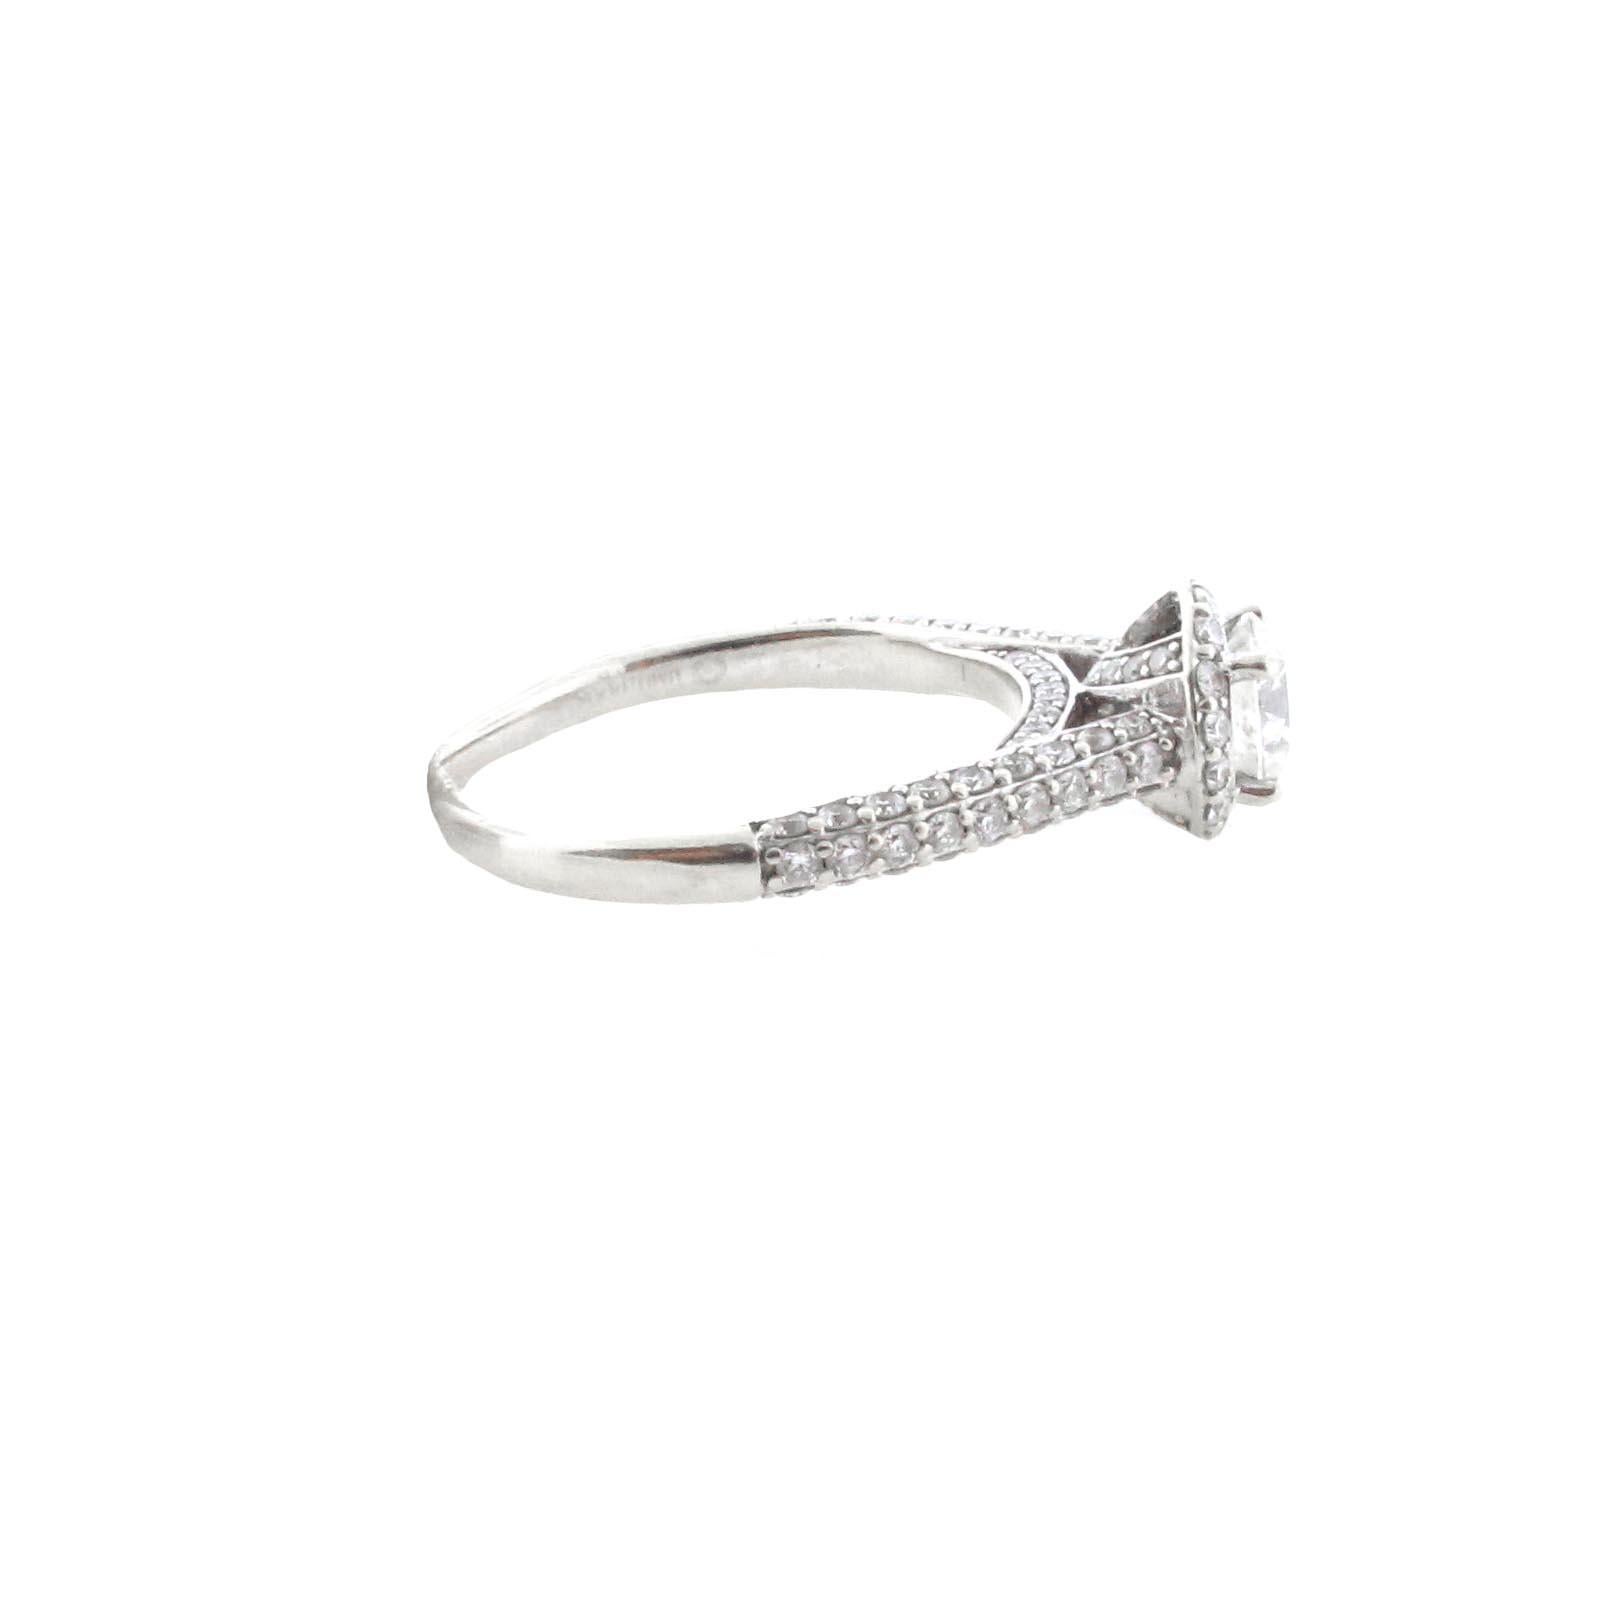 This ring is truly a classic. Brides are often seen wearing an engagement ring looking very similar to this.
A 14 Kt white gold ring with a round center stone weighing 0.61 carats. The stone is estimated to be an H in color and I1 in clarity. The